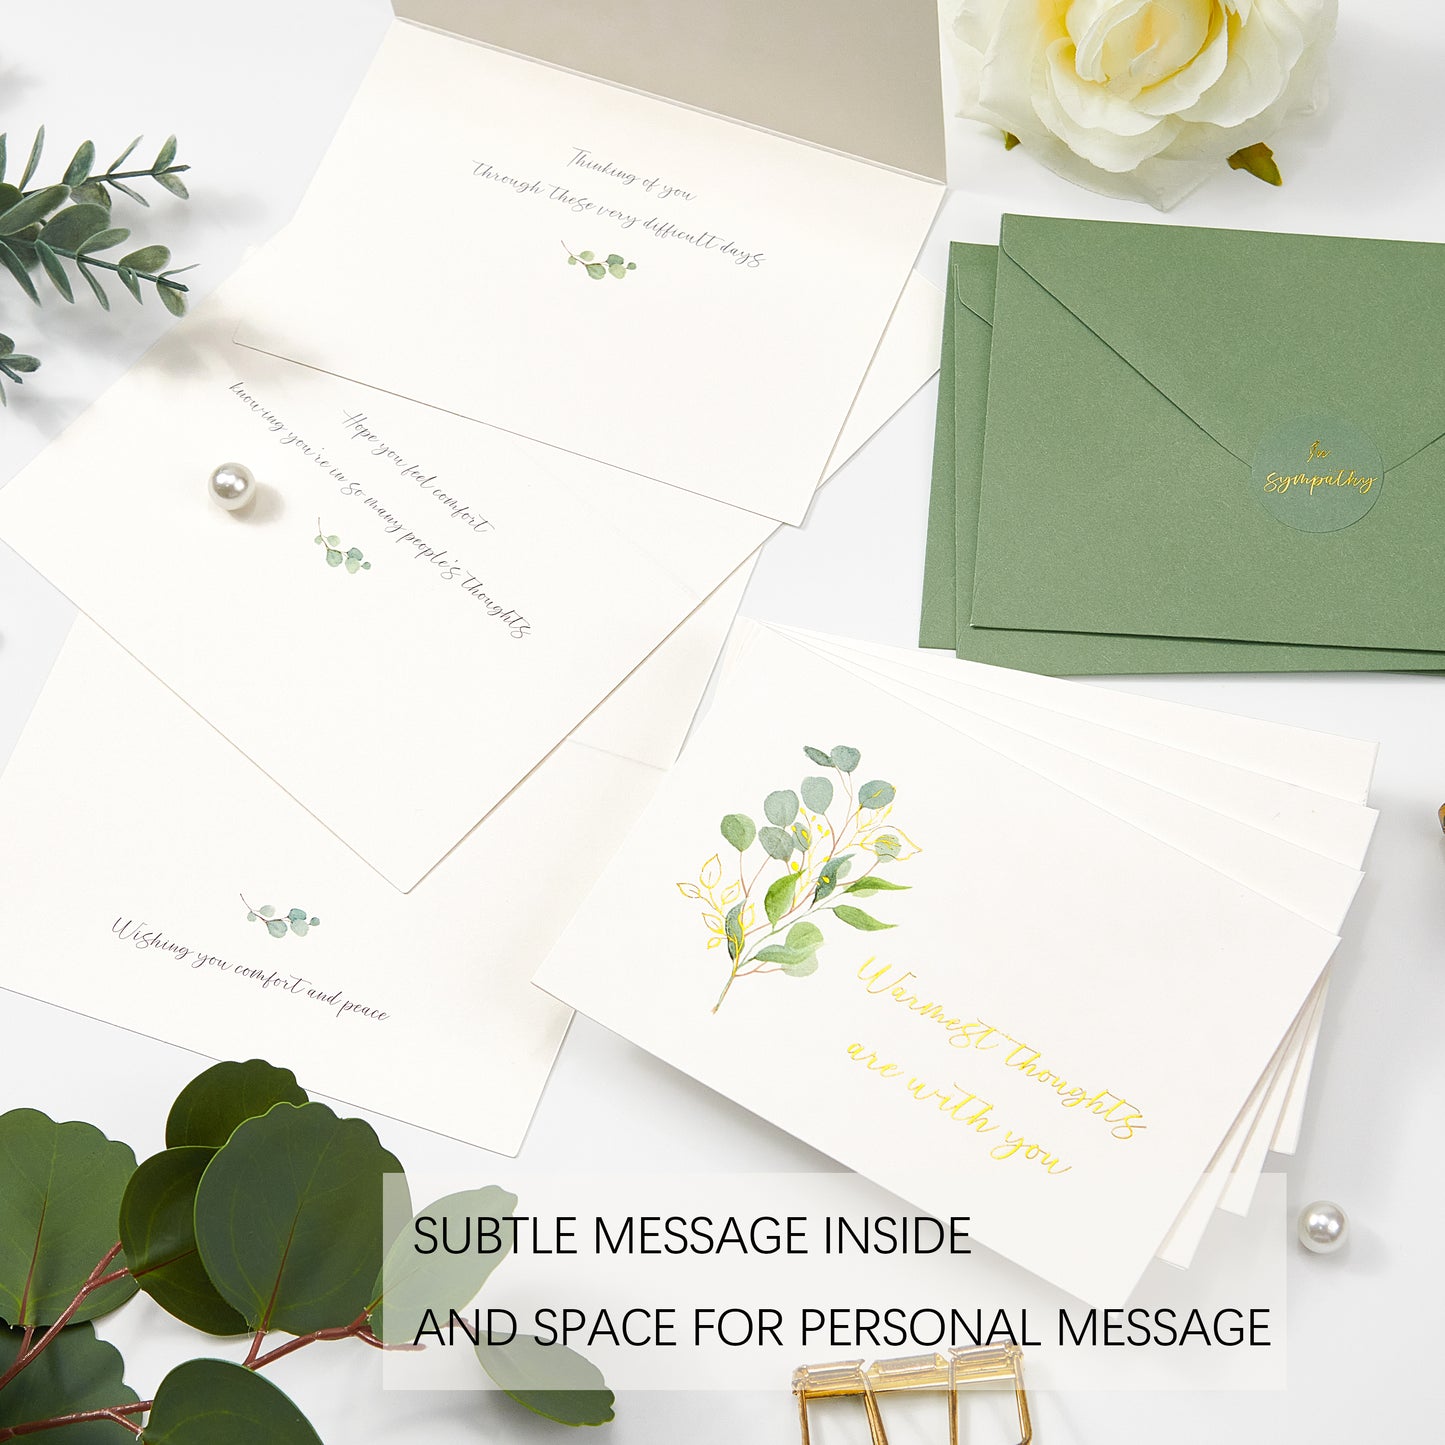 Crisky 12 Pack Greenery Gold Foil Sympathy Cards with Envelopes Boxed 4 Assortment Condolence/Bereavement Cards